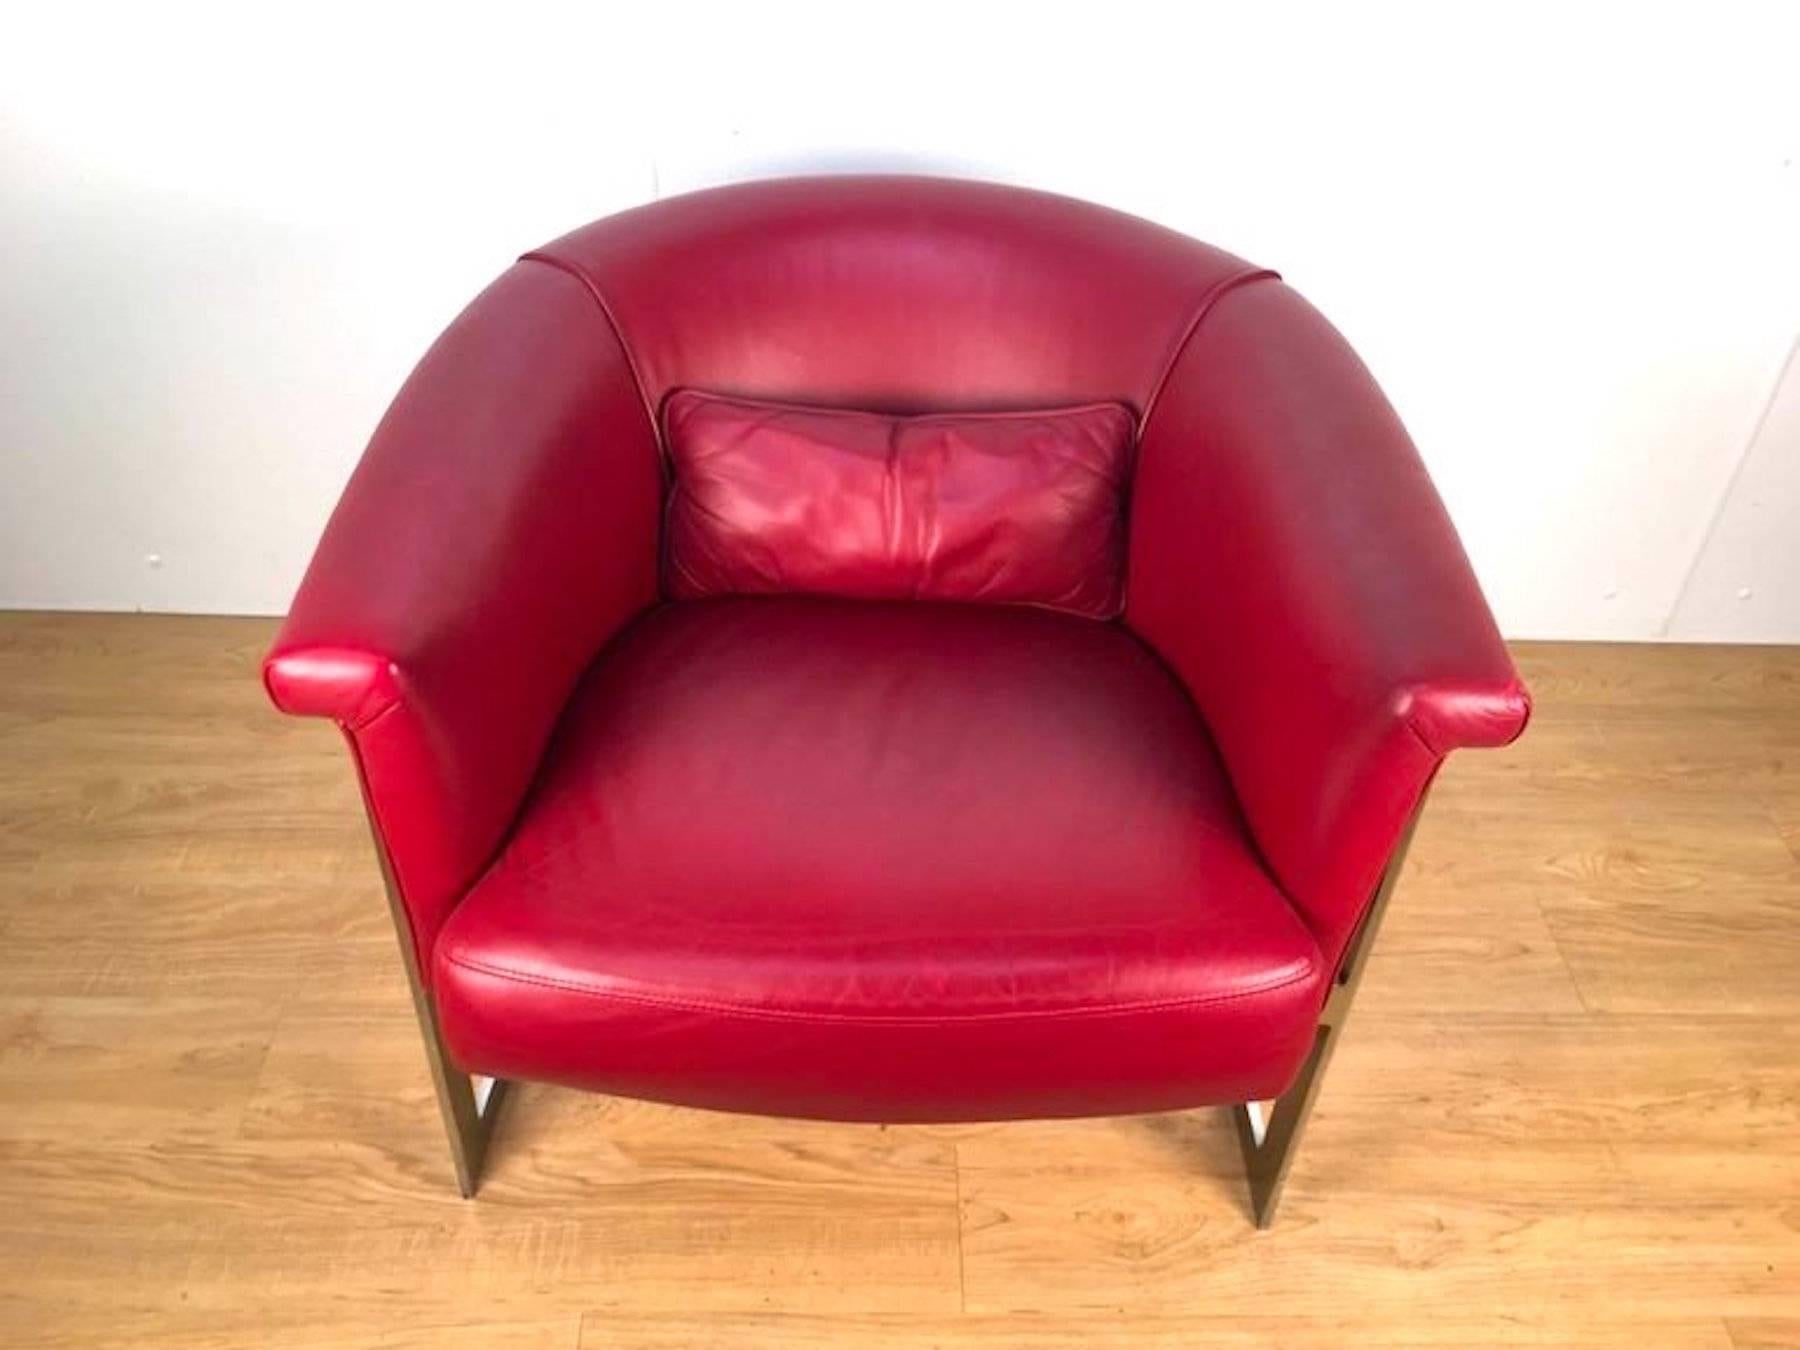 John Stuart style rounded lounge chair in custom red leather. Clean, bright frame with rich red leather upholstery and accent pillow.